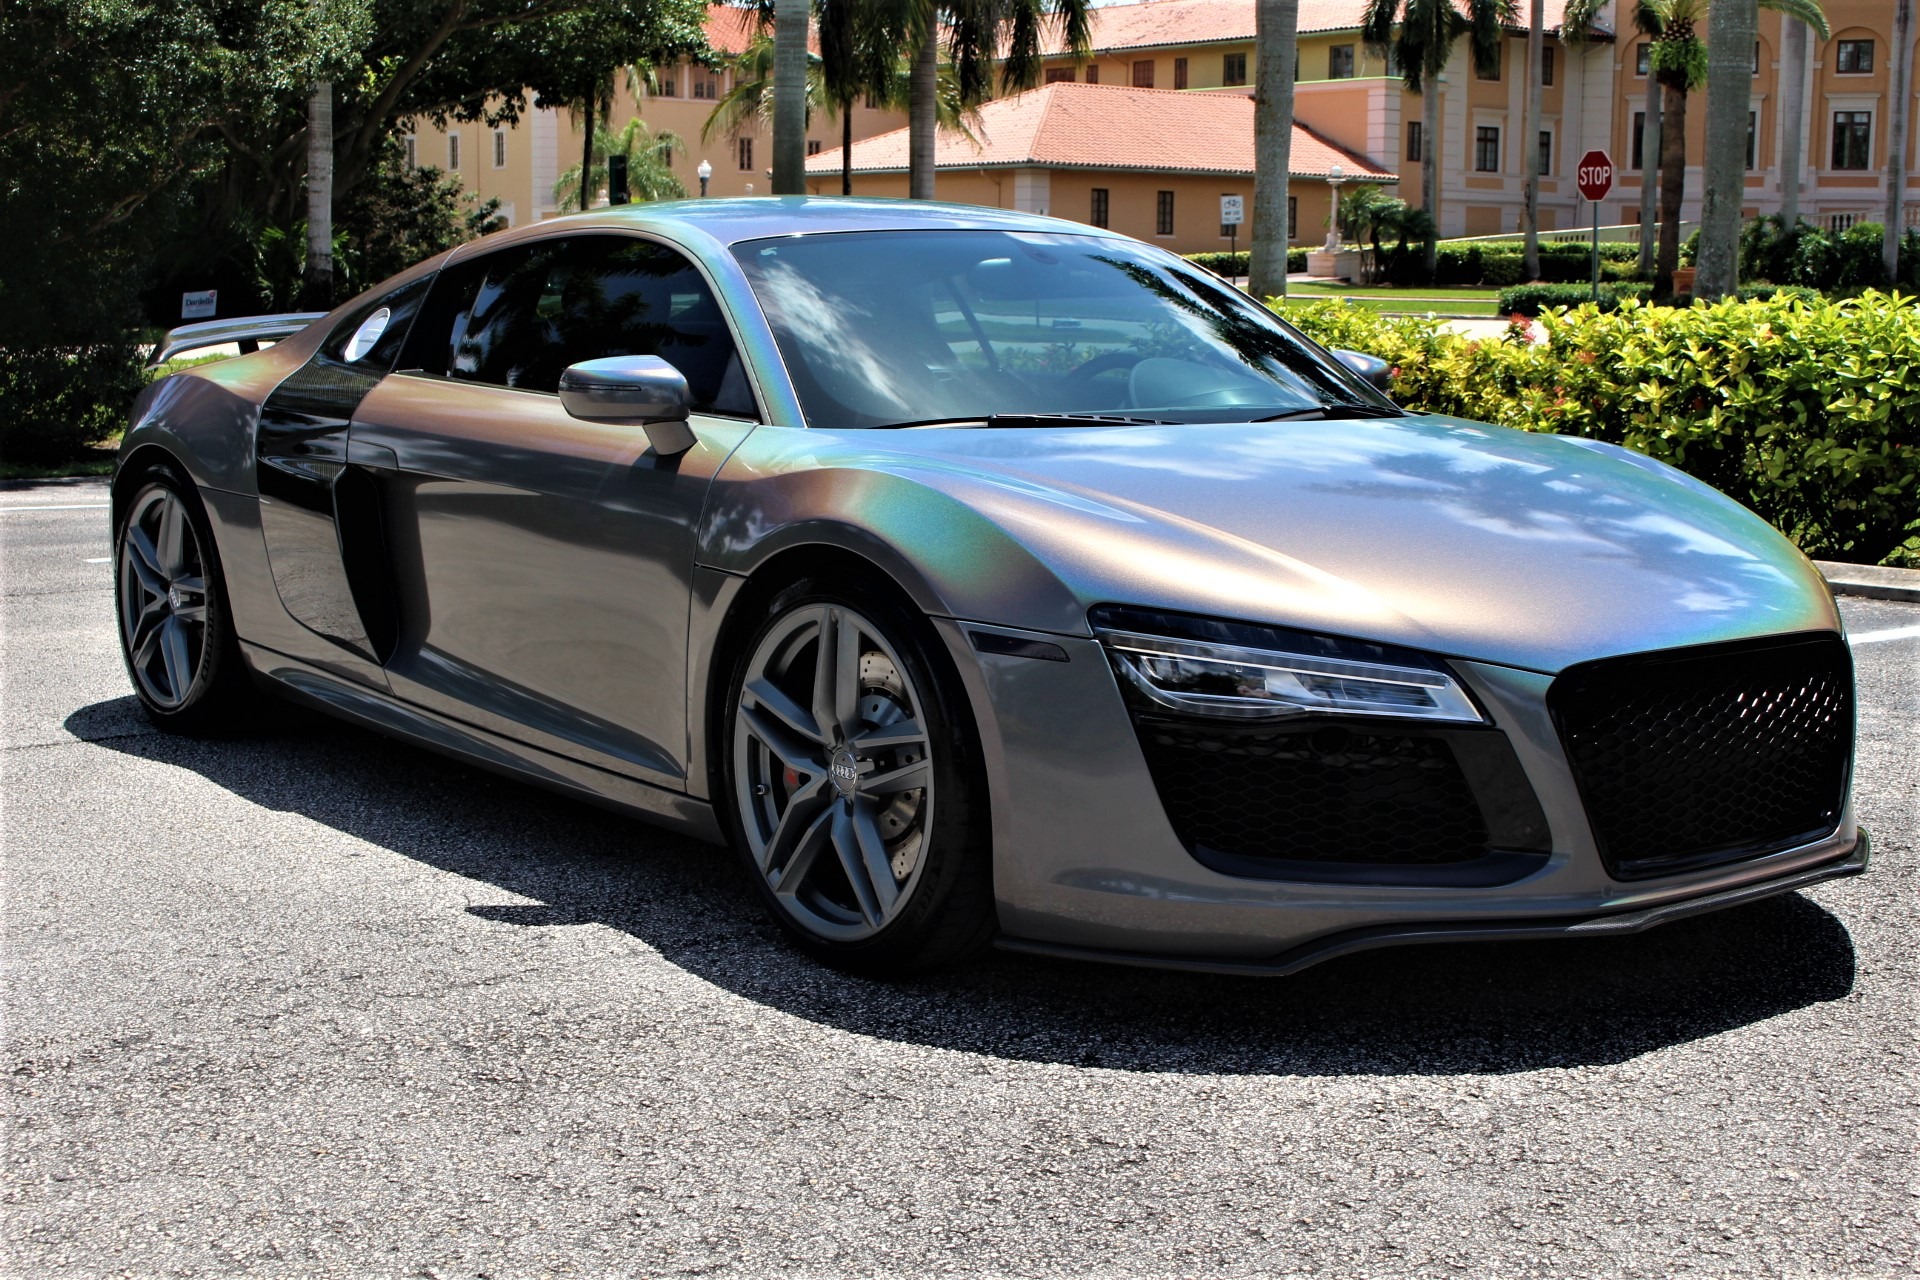 Used 2014 Audi R8 5.2 quattro for sale Sold at The Gables Sports Cars in Miami FL 33146 2